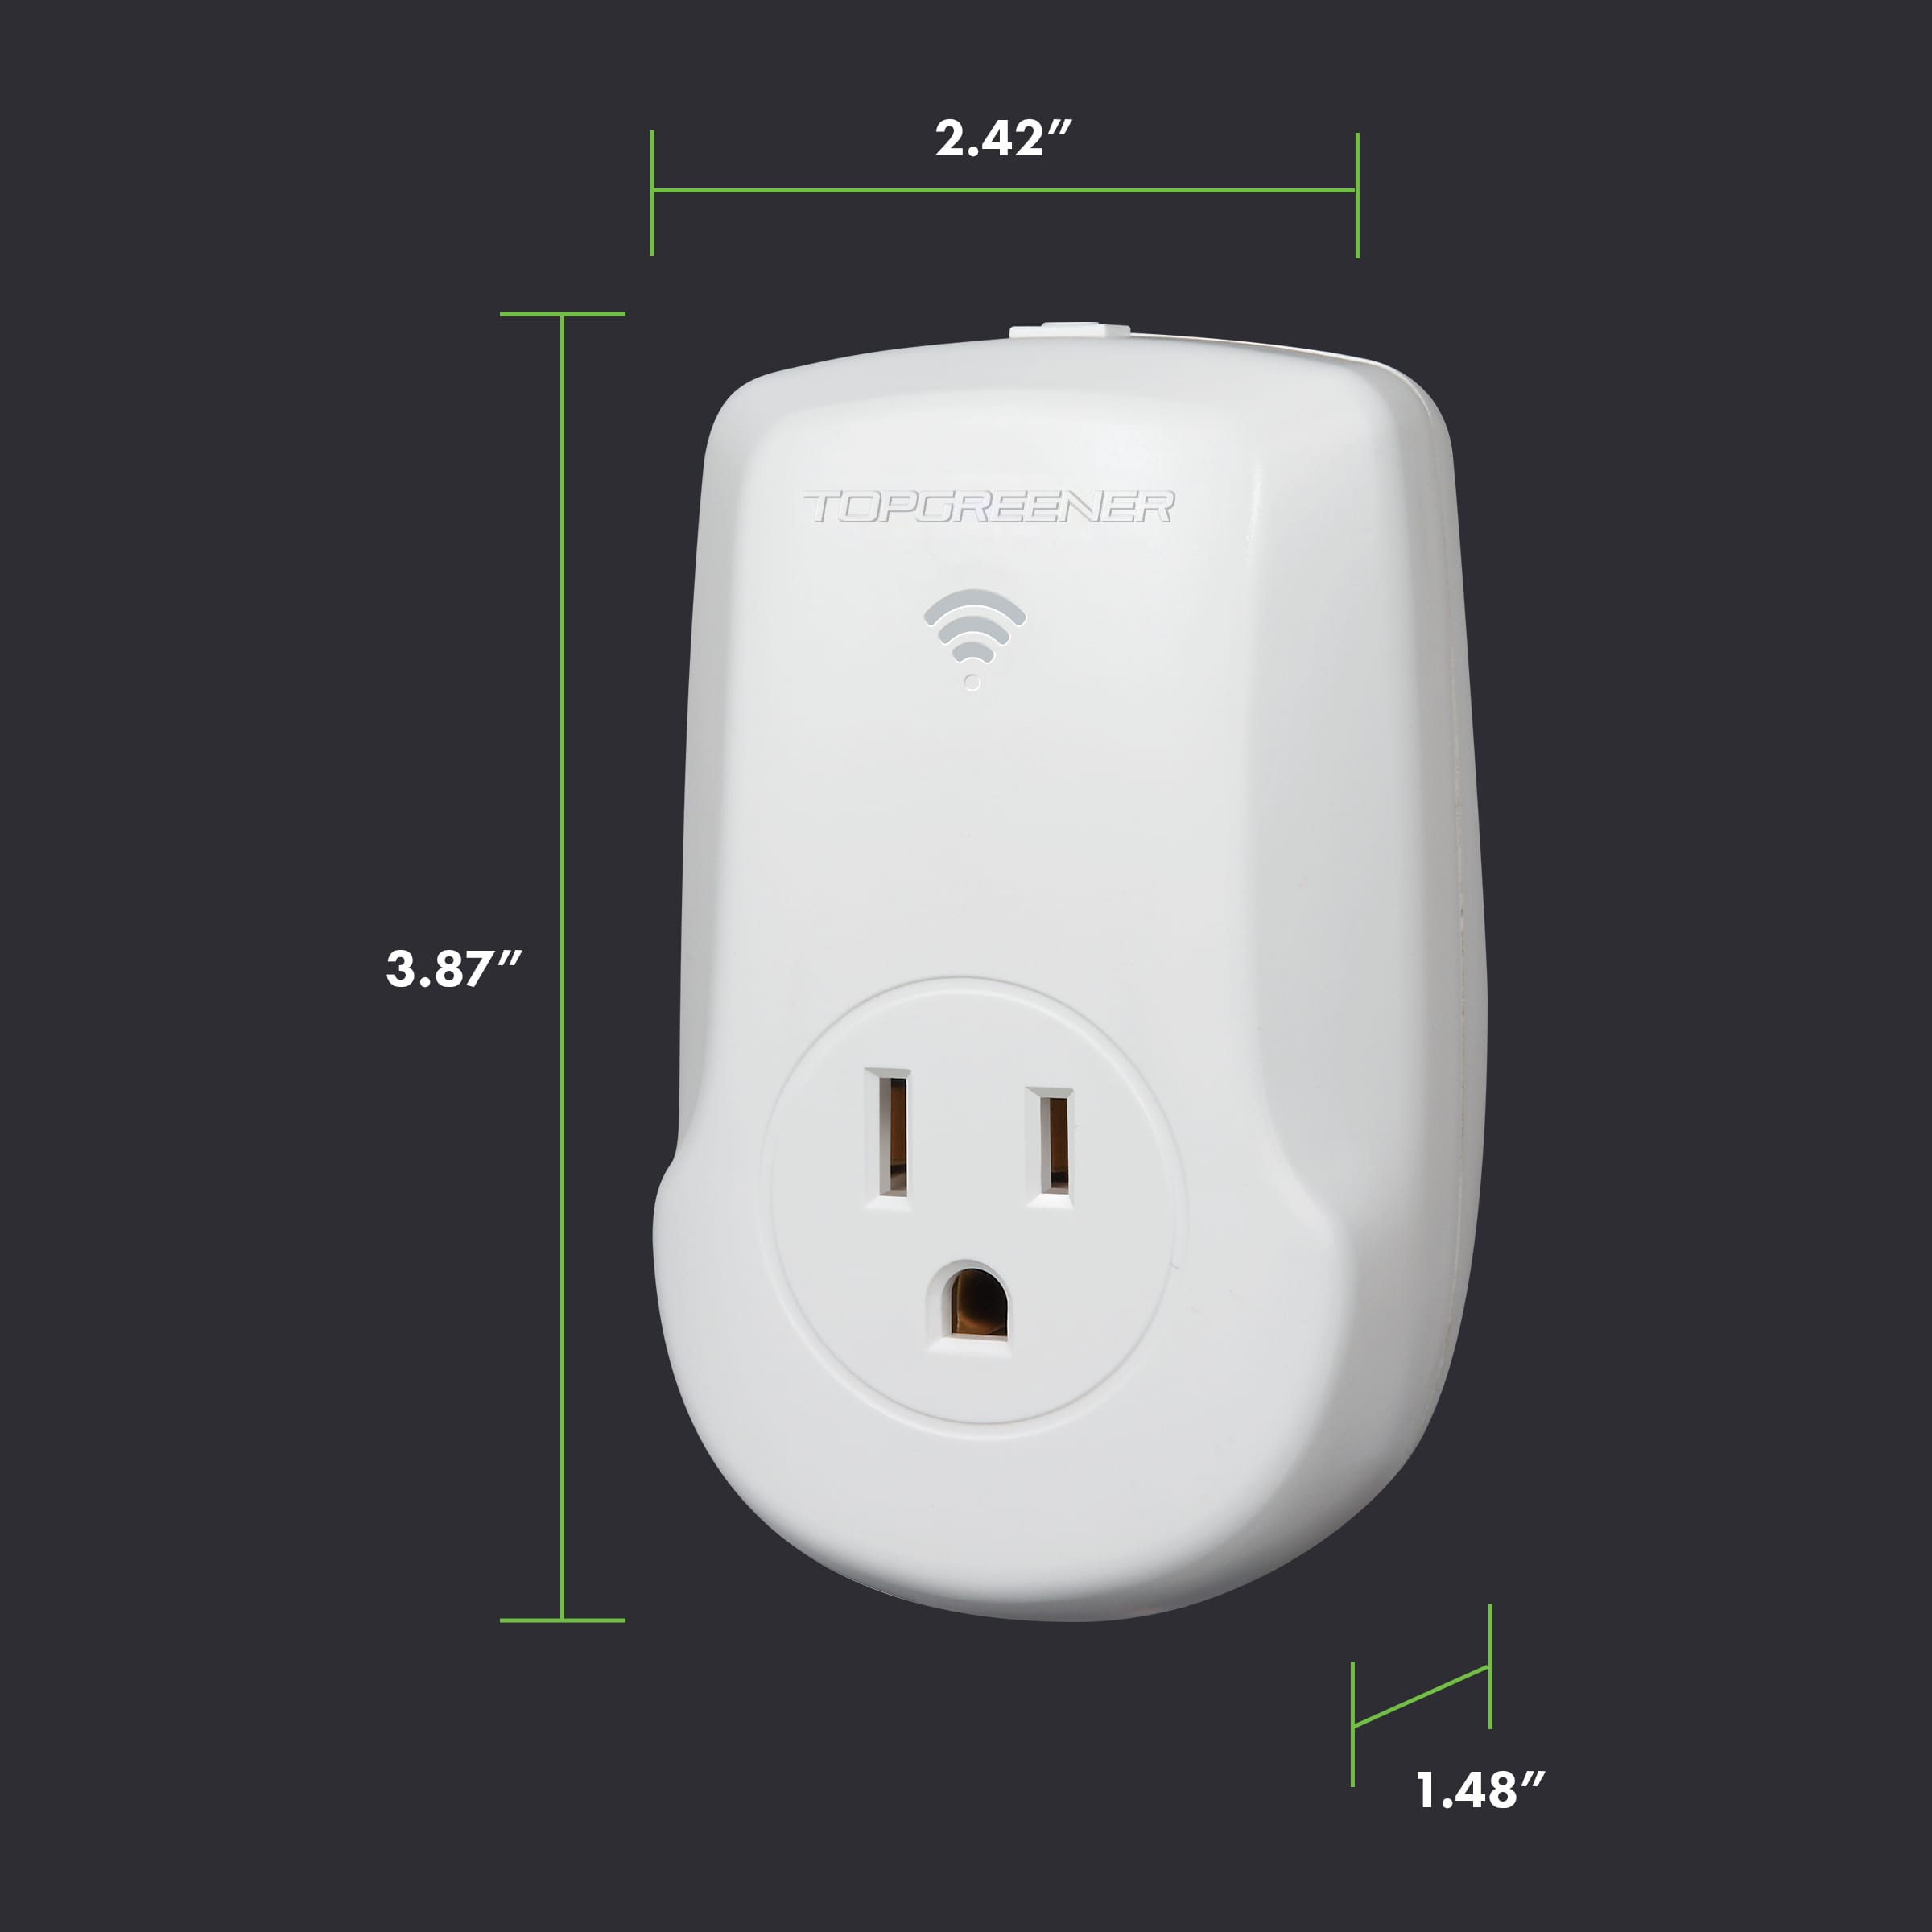 Remote Control Outlet Switch, Wireless On Off Power Plug 1800W